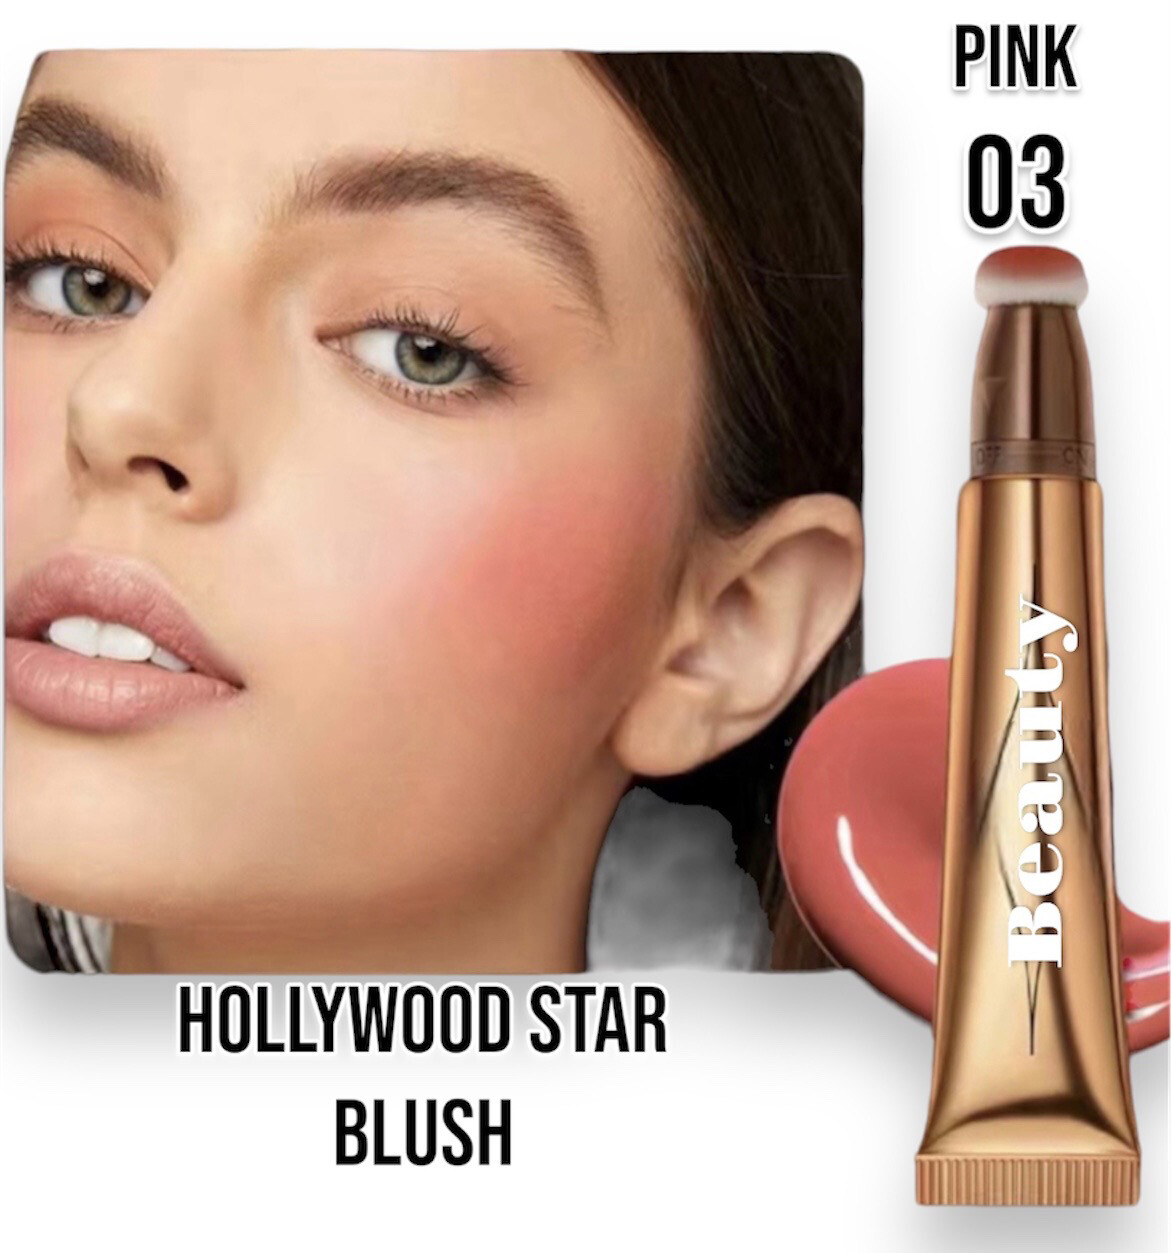 The Hollywood Star Blush Pink 03